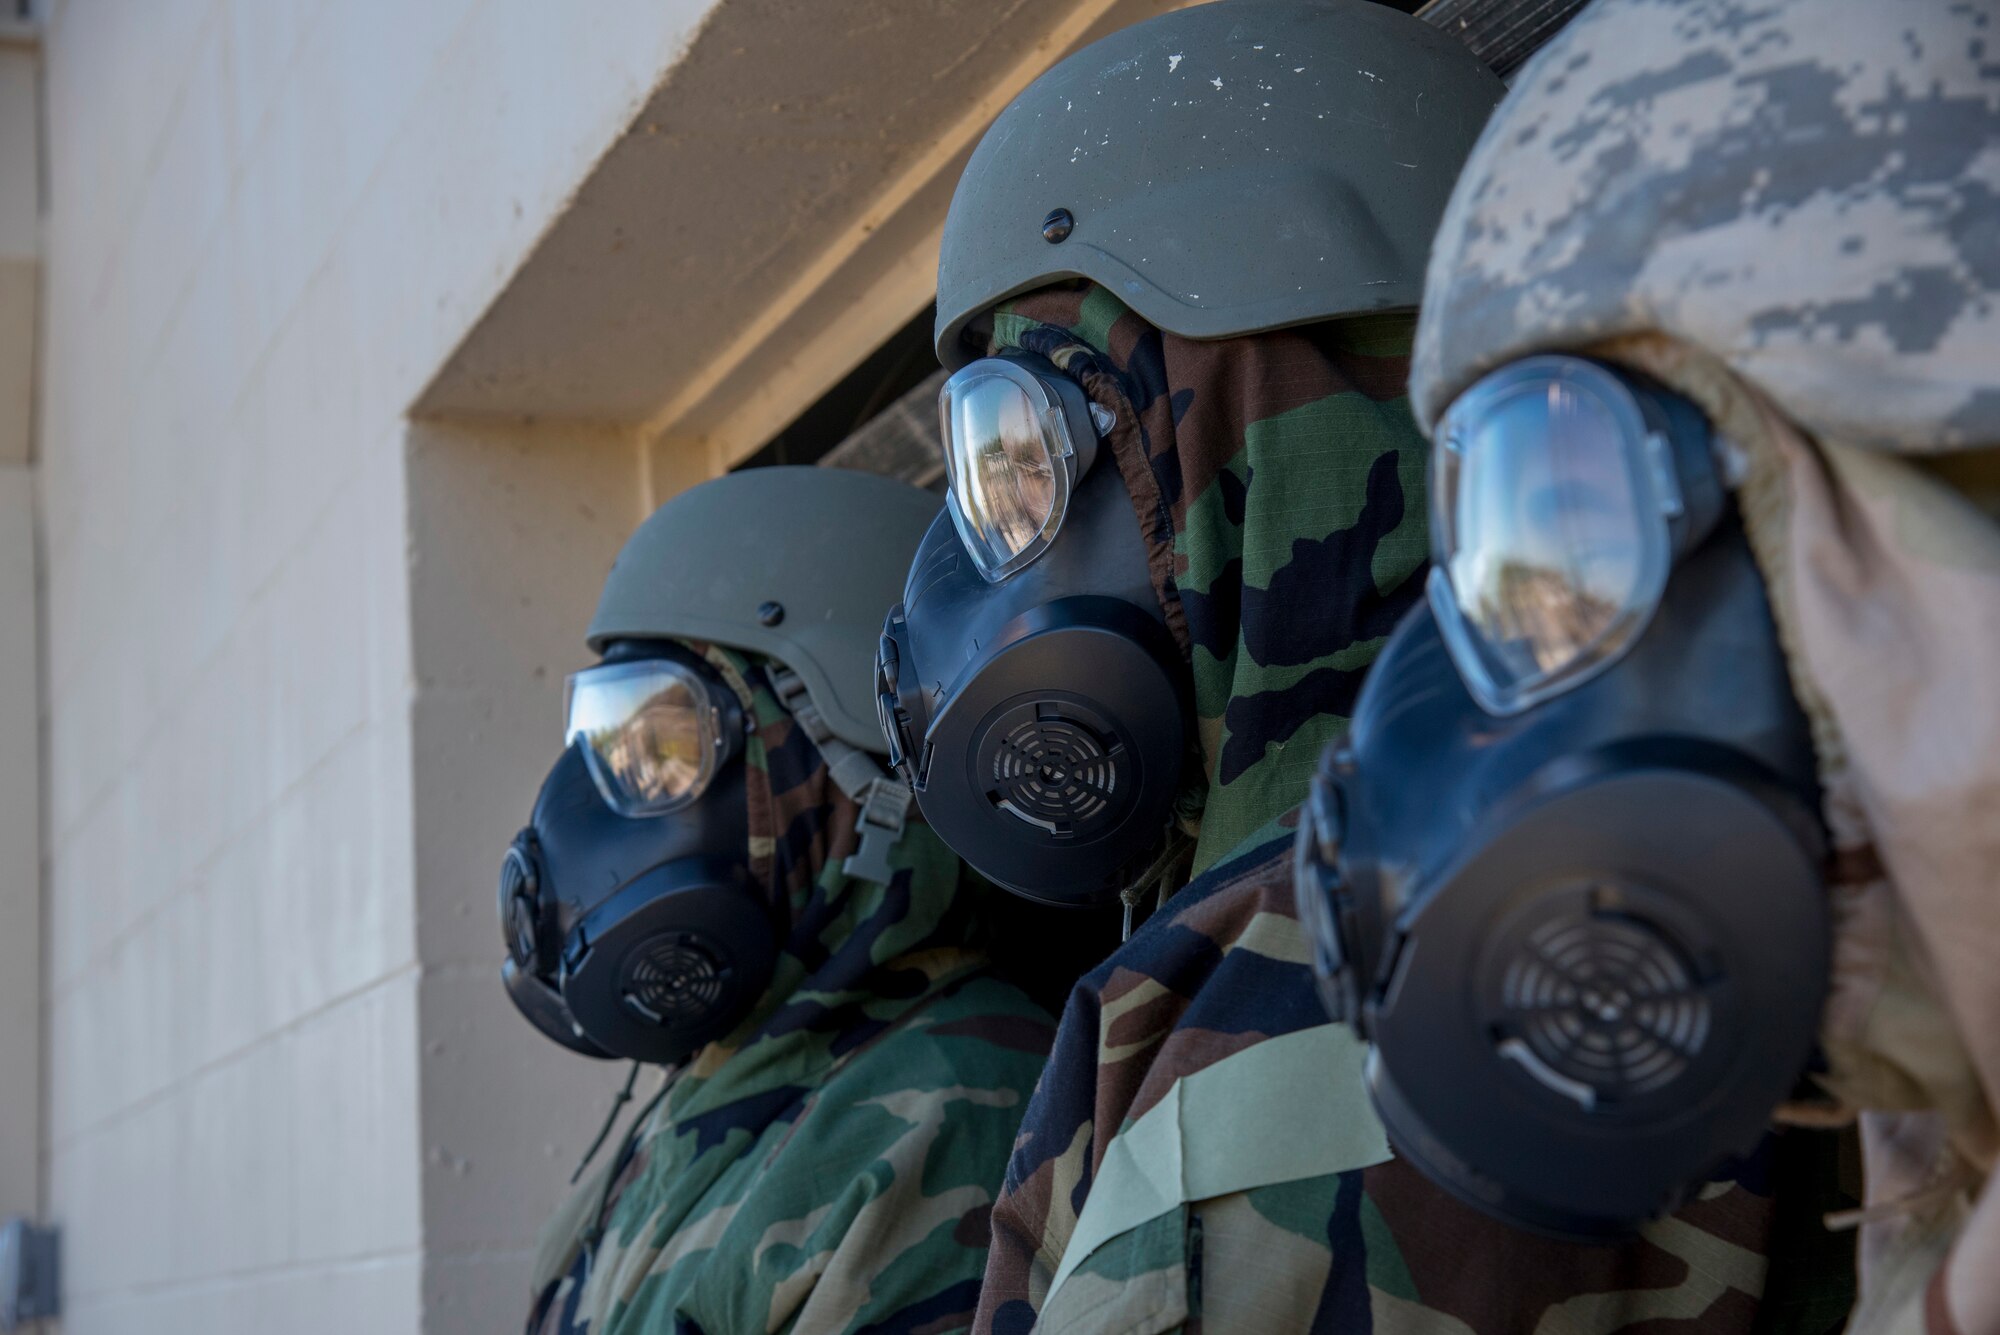 6th Mission Support Group Airmen don mission-oriented personal protective gear during an Ability to
Survive and Operate training exercise at MacDill, Air Force Base, Fla., Dec. 6, 2018. This equipment
protects the Airmen and allows them to continue operations and provide security in the event of a
chemical attack.